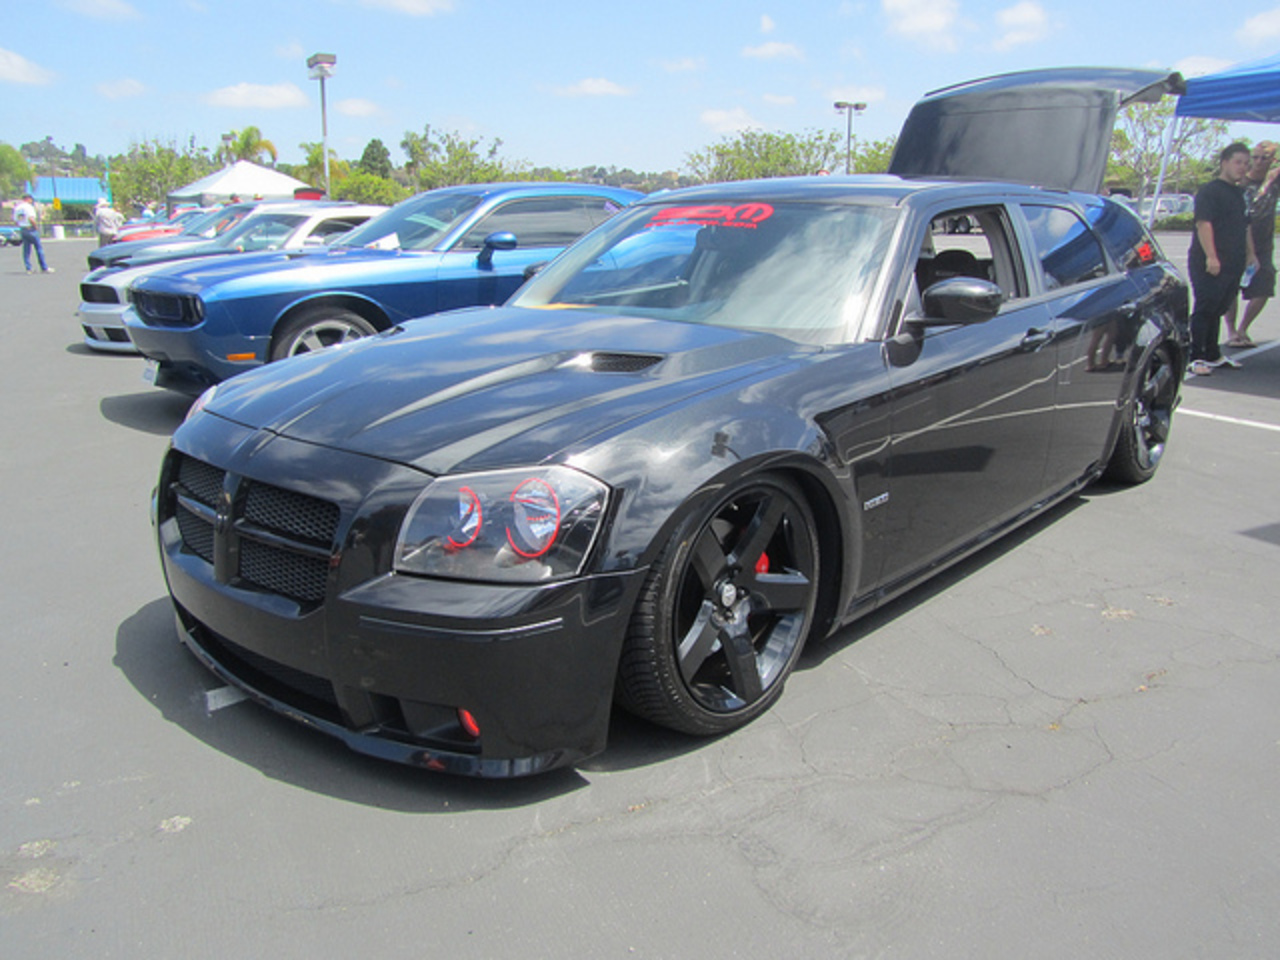 Flickr: The Dodge Magnum Fan Clubs Pool